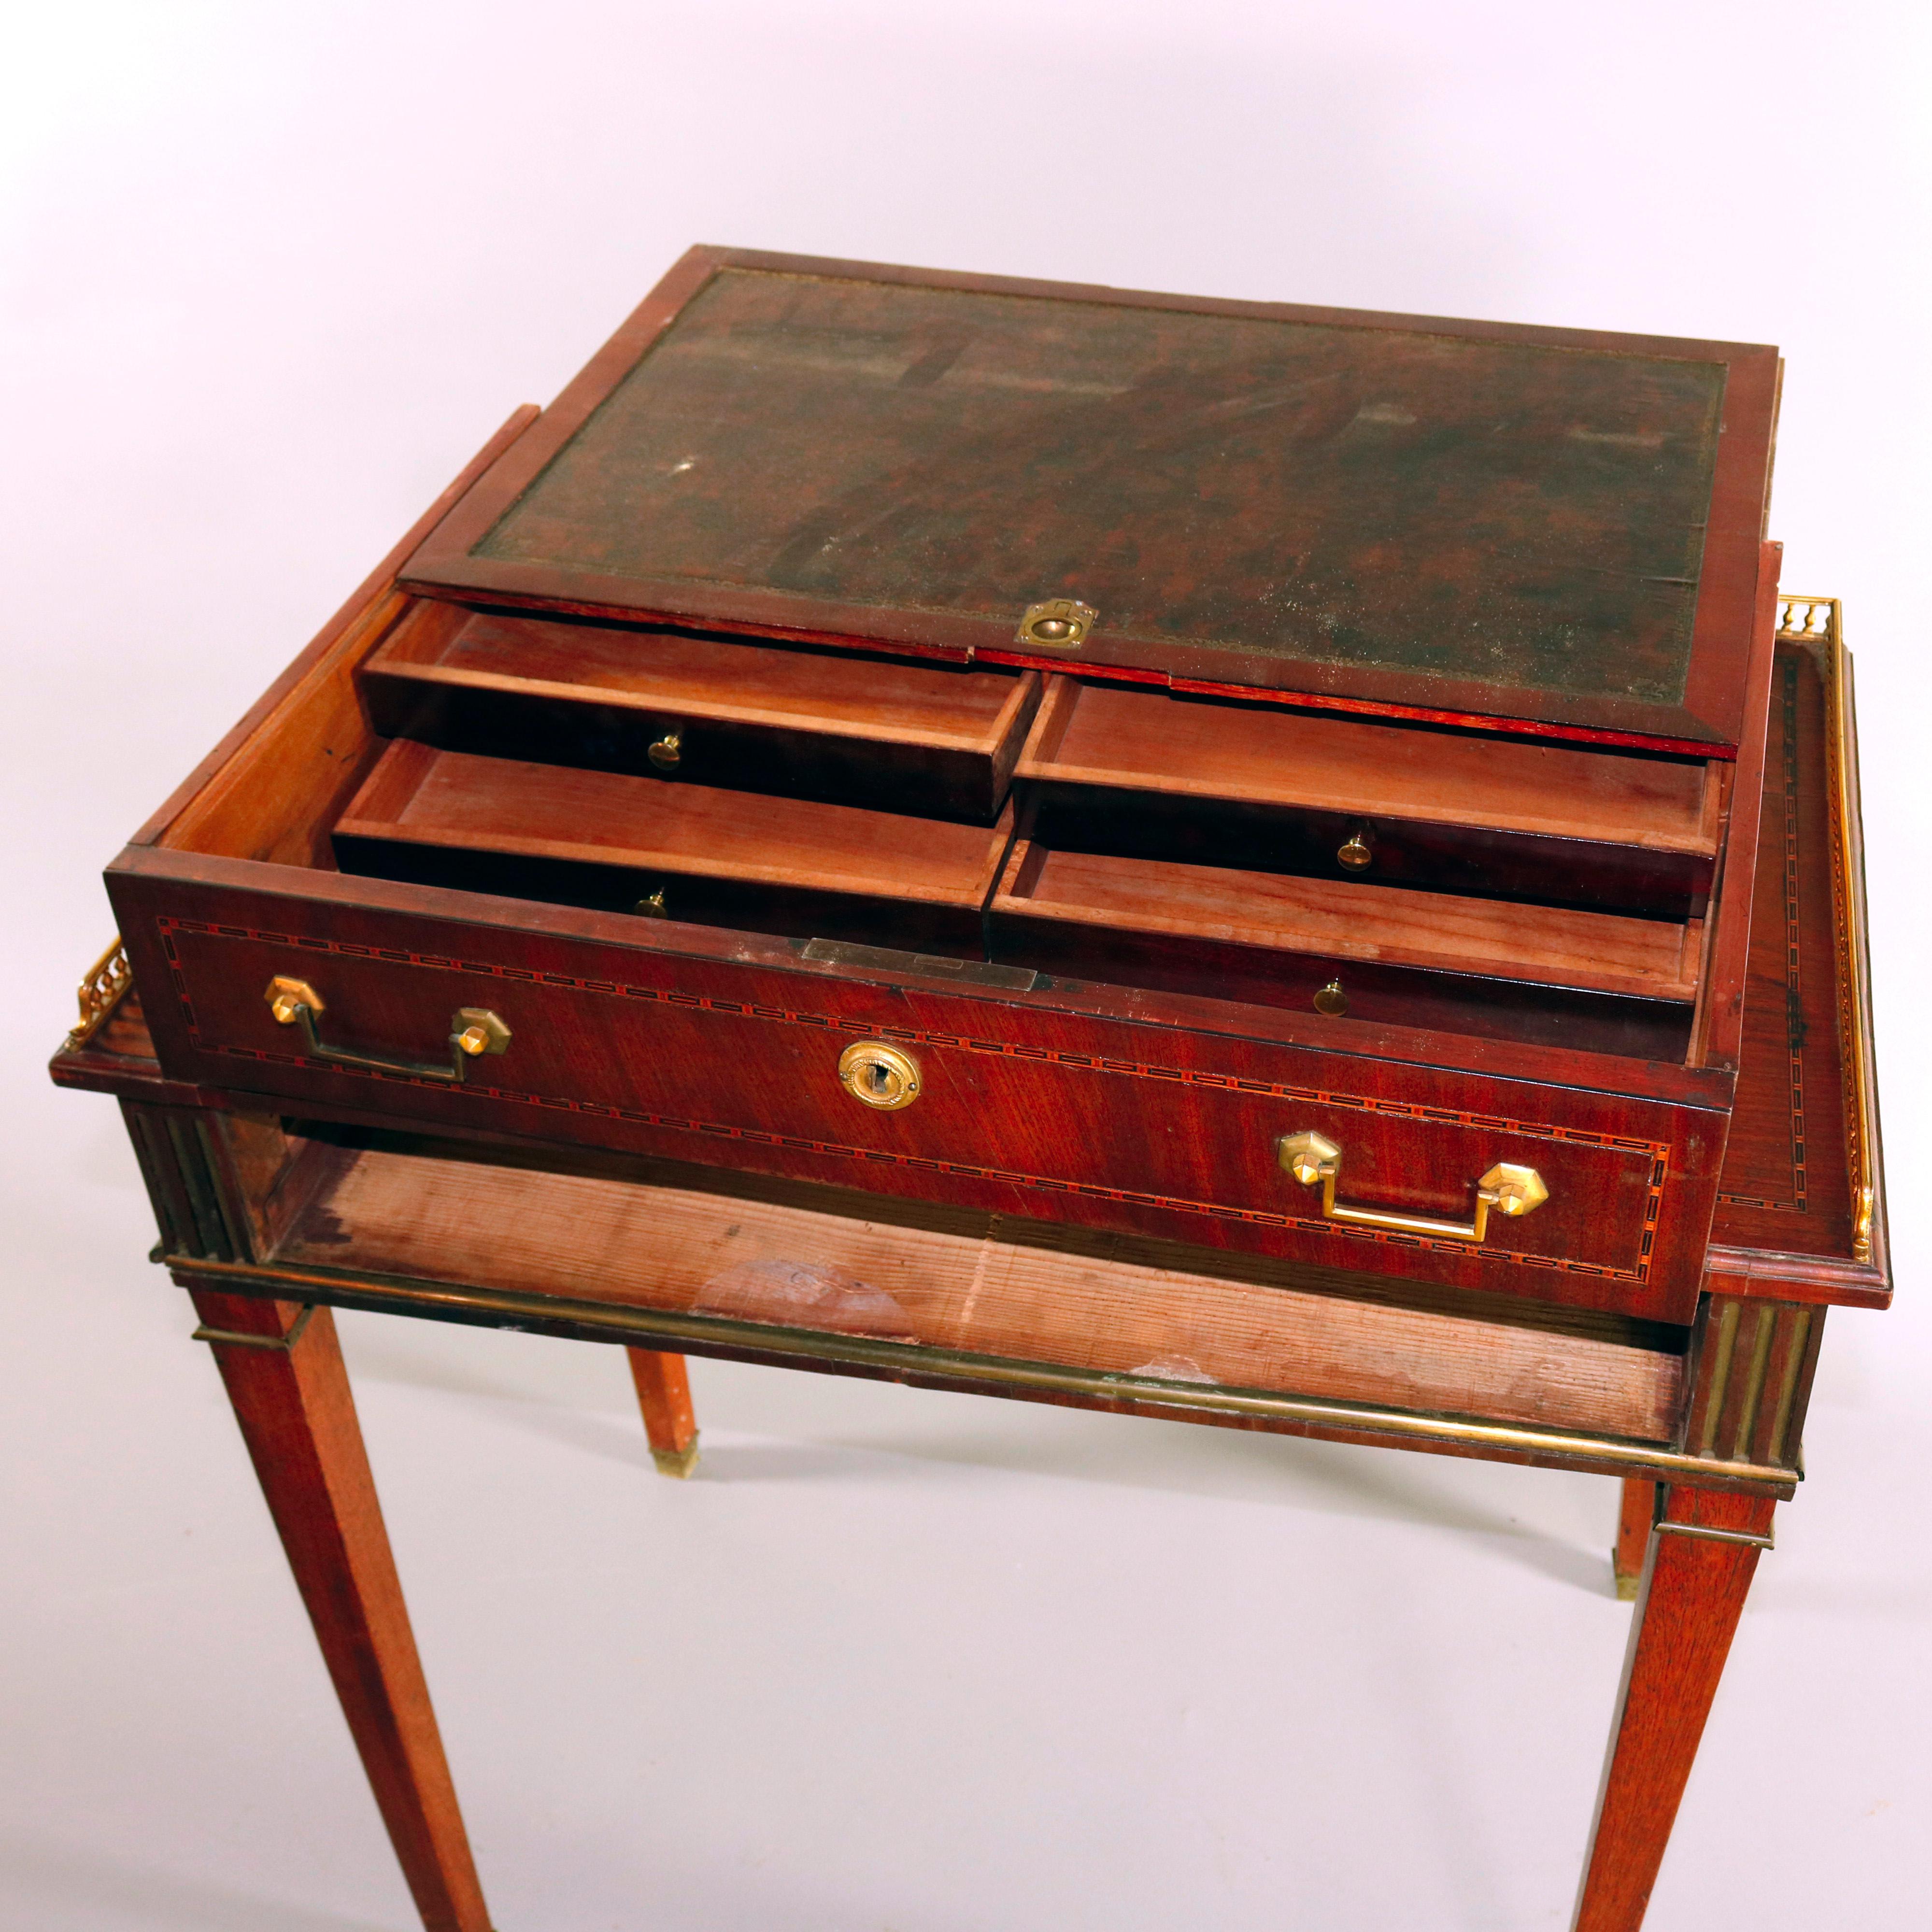 An antique English George III kneehole writing desk feature mahogany construction with frieze drawer opening to reveal leather top writing surface and multiple interior compartments, satinwood and ebonized banding throughout and oval inlaid reserve,